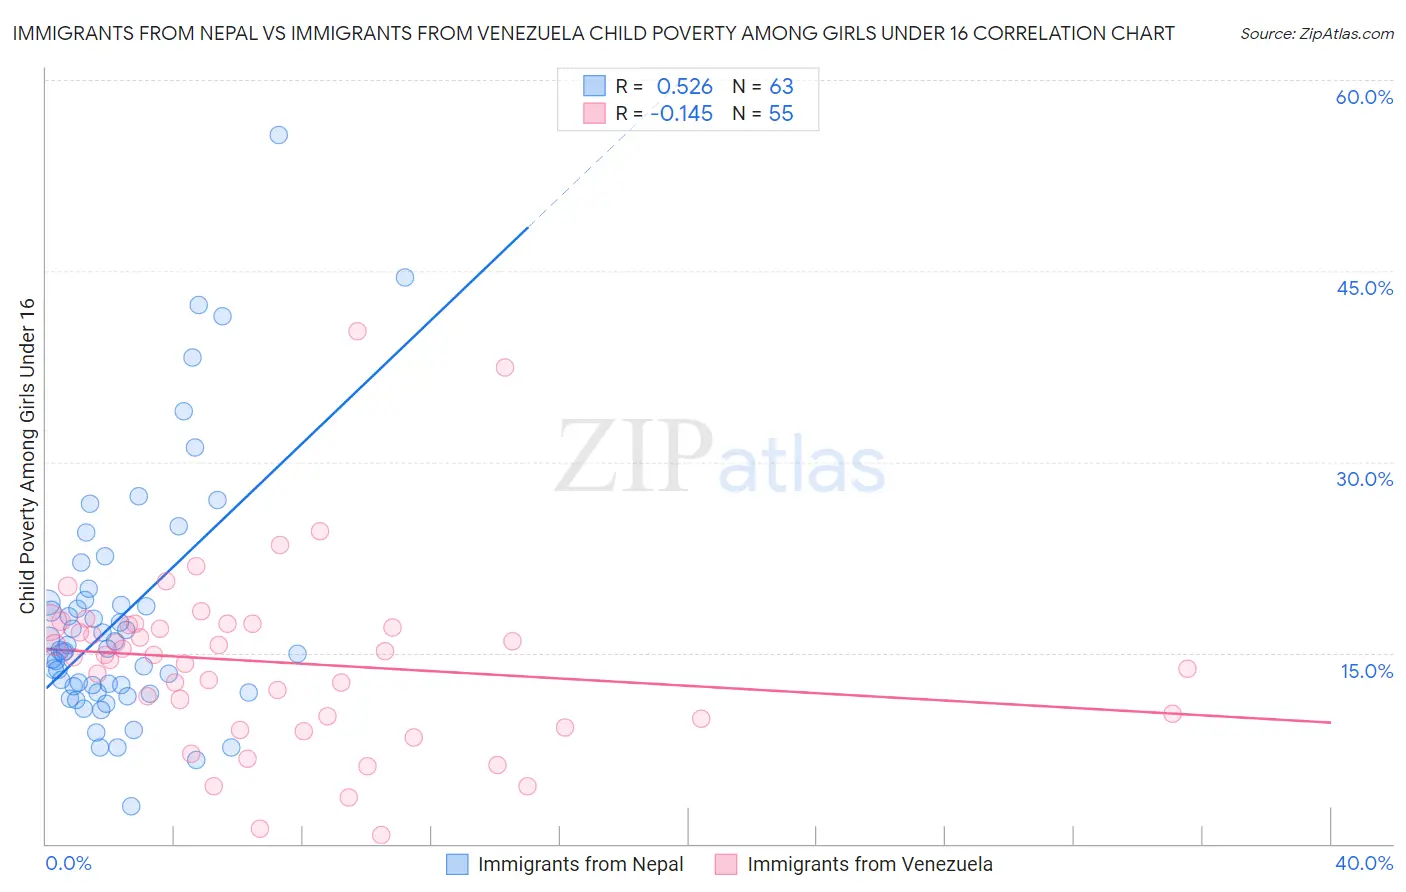 Immigrants from Nepal vs Immigrants from Venezuela Child Poverty Among Girls Under 16